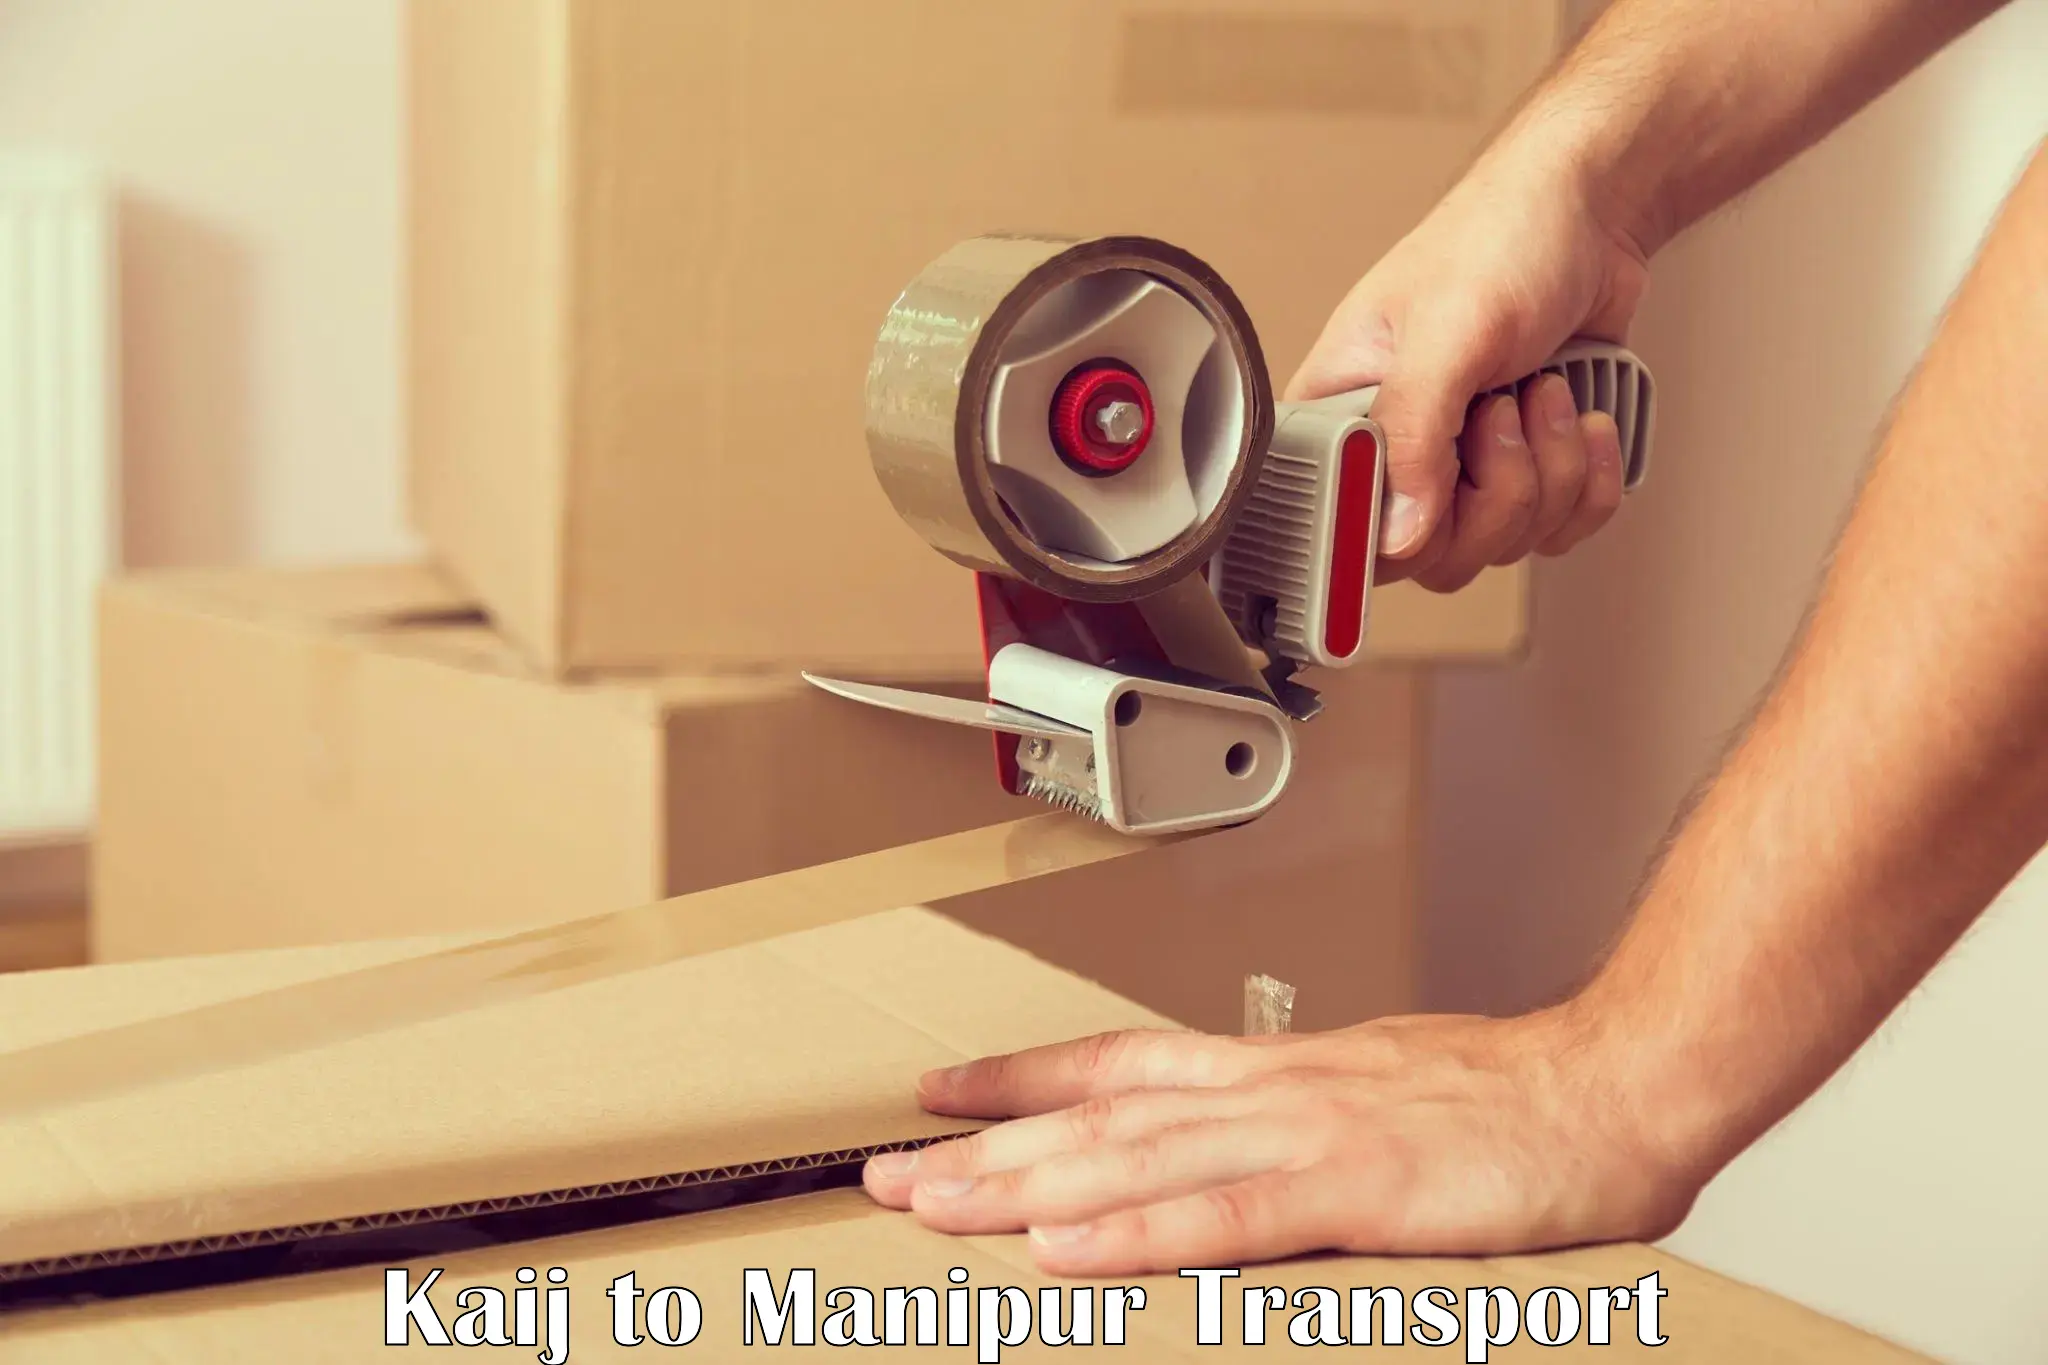 Road transport online services Kaij to Manipur